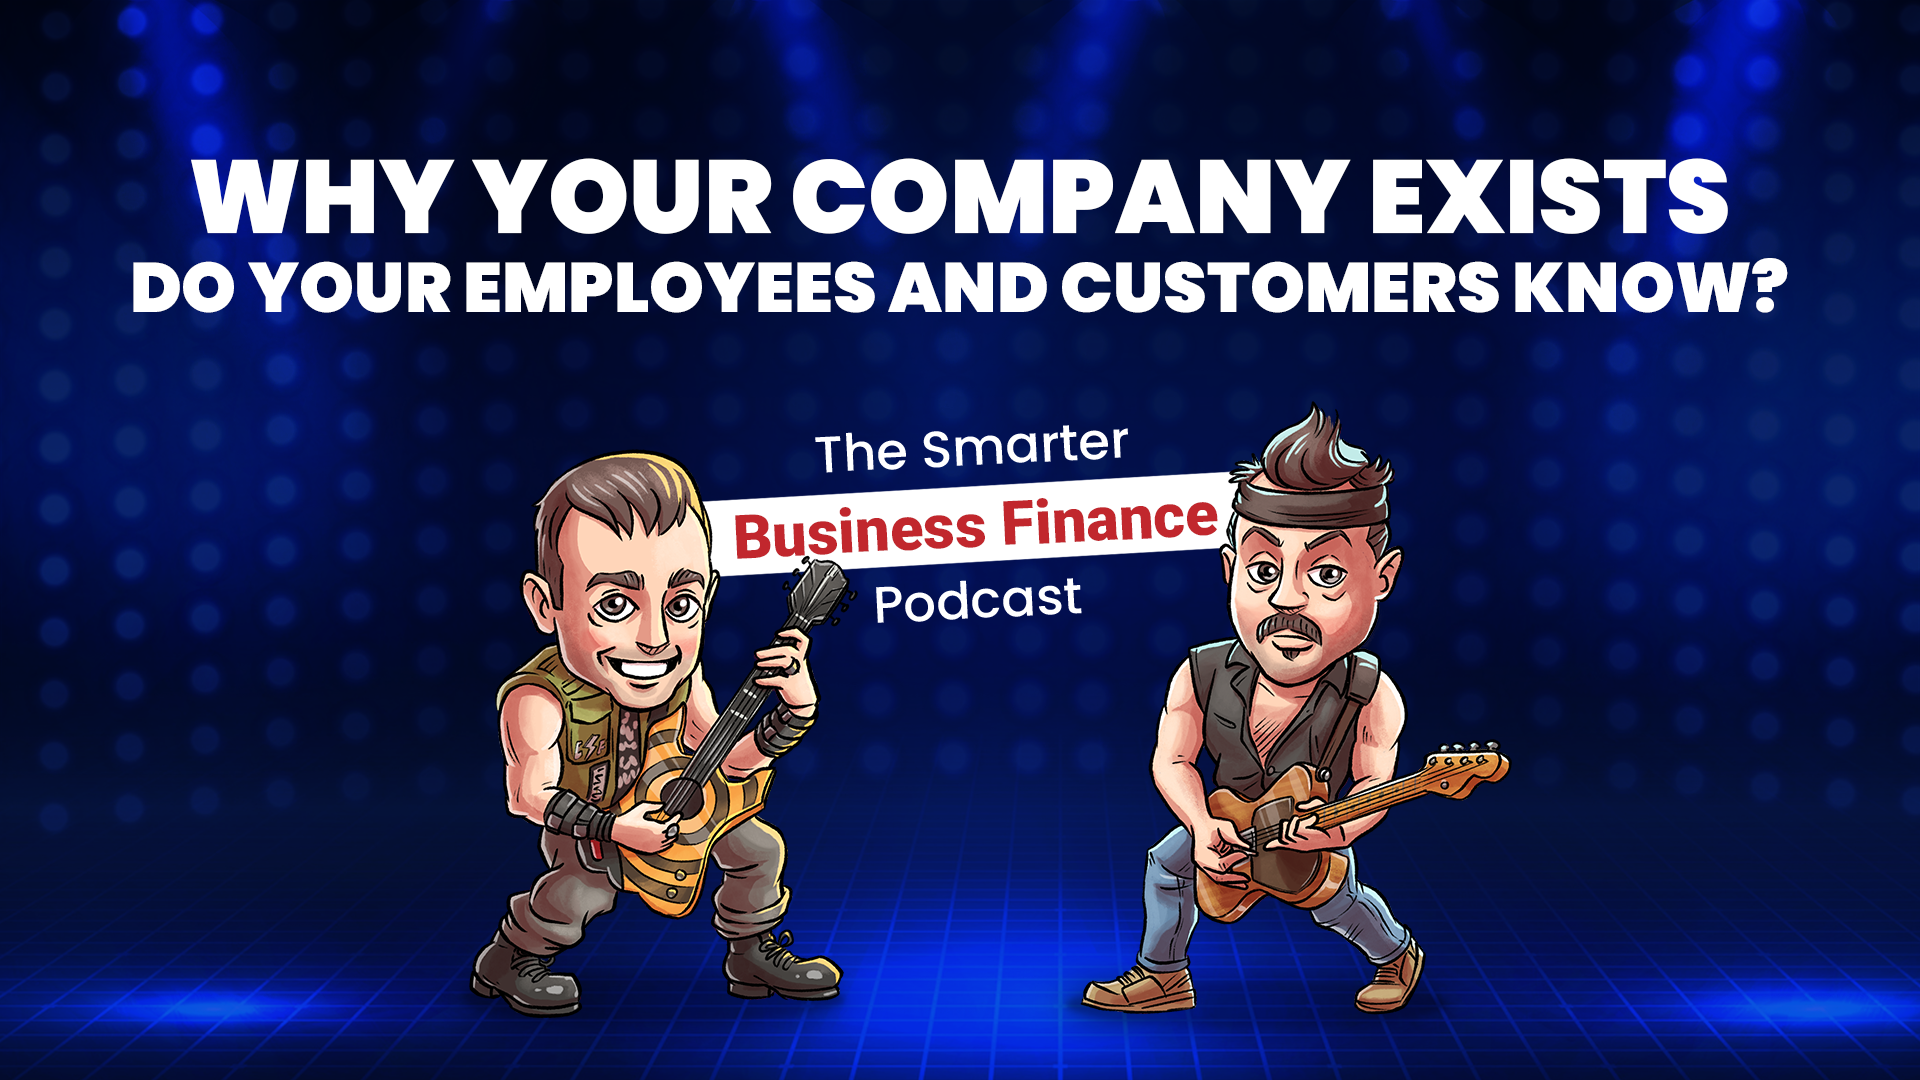 Why Your Company Exists - Do Your Employees and Customers Know?